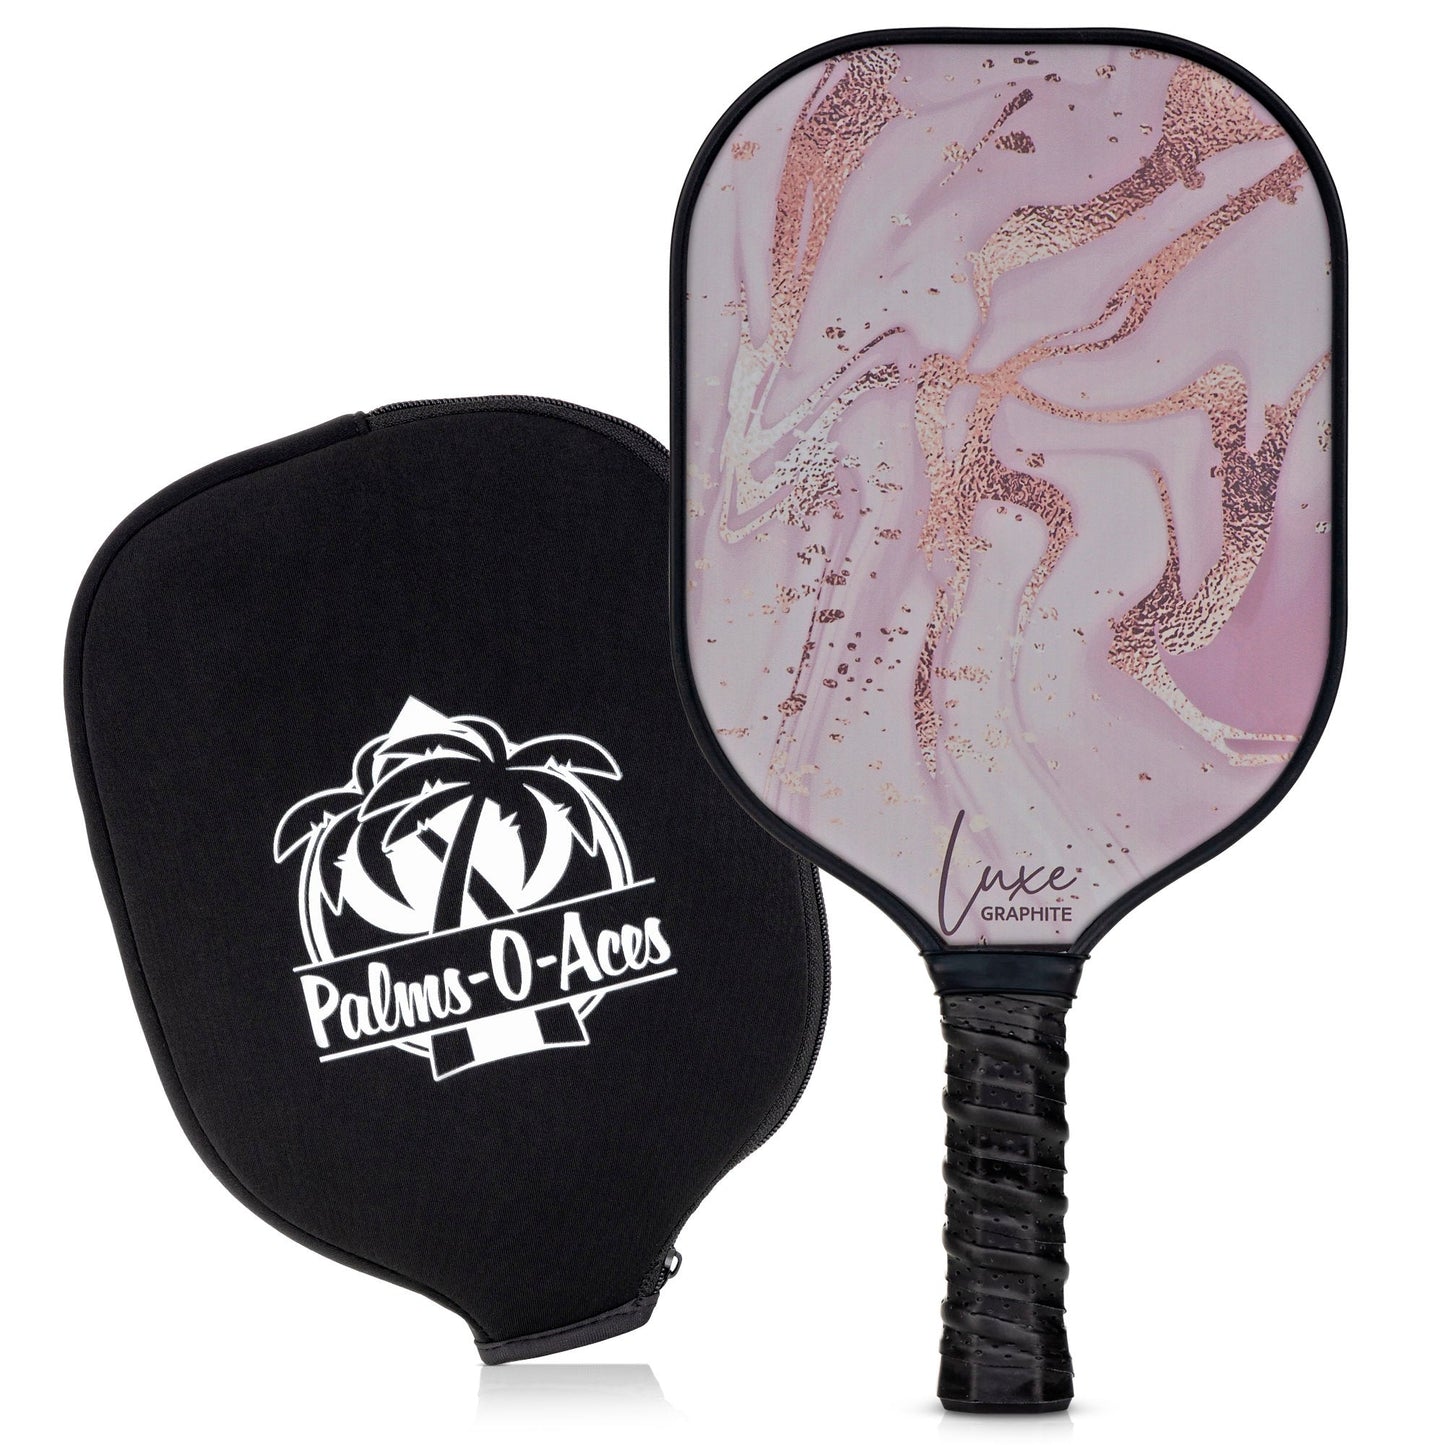 Golden Pink with Black Luxe Graphite Pickleball Paddle with Cover - Palms-O-Aces